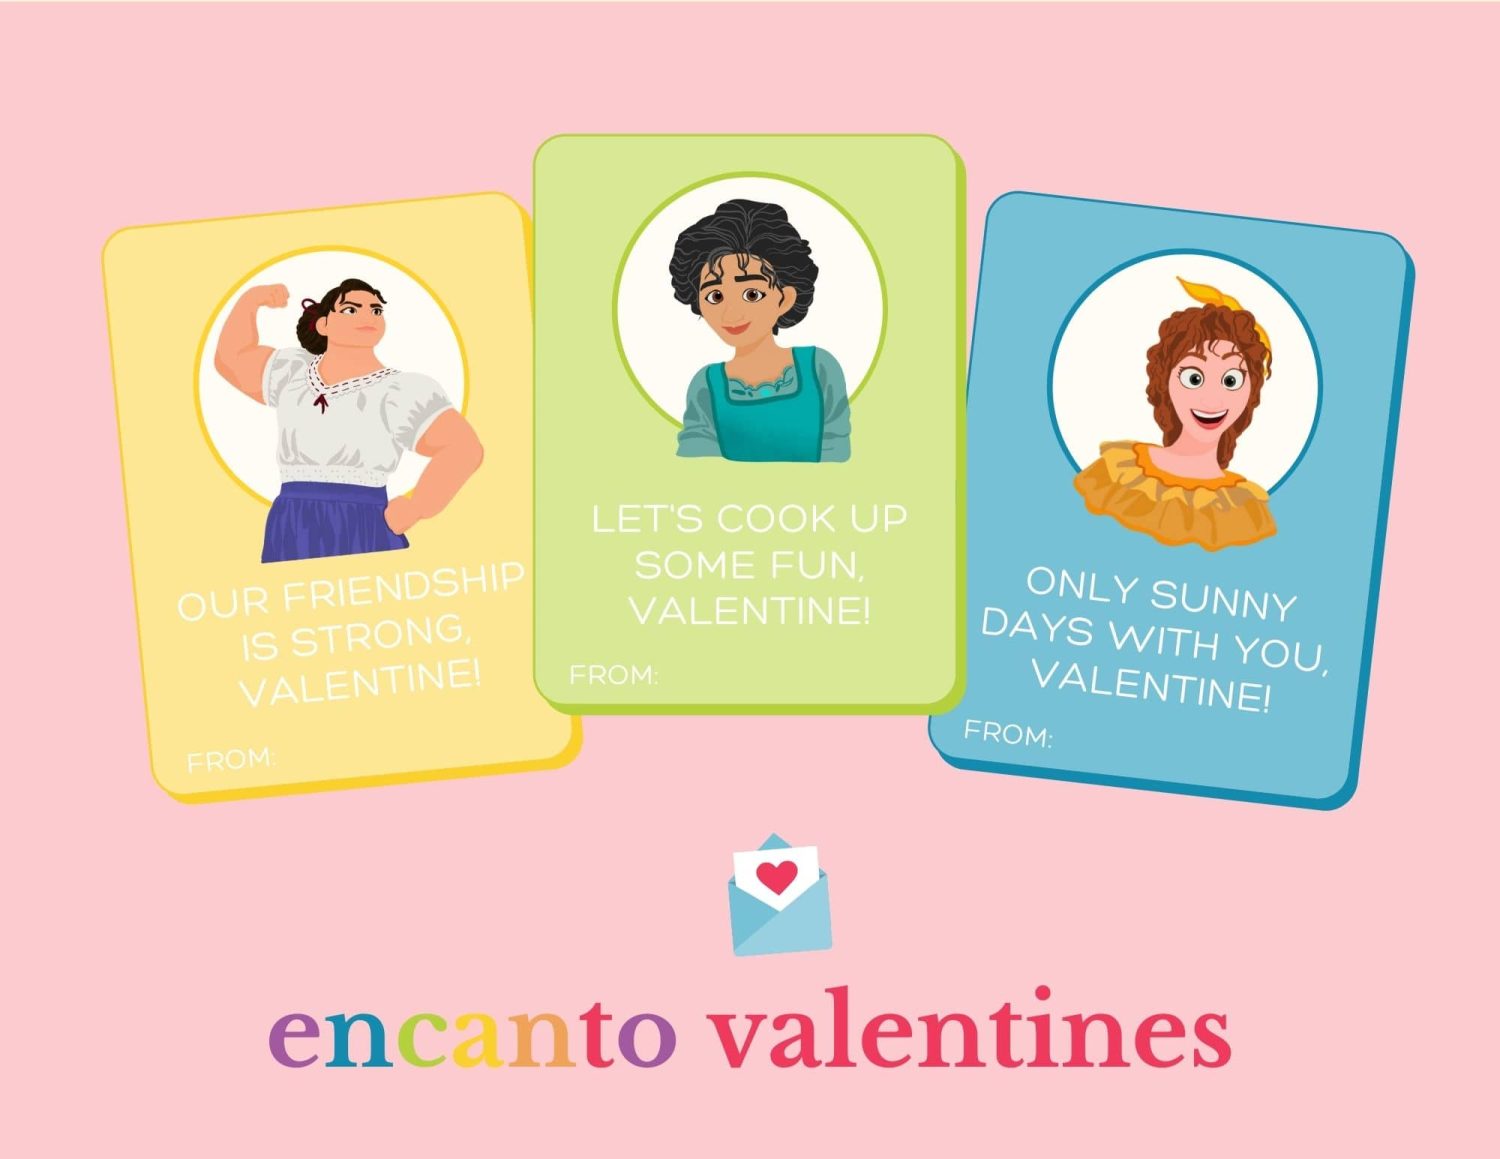 Encanto Valentine's Day Cards from Devine Fairytale